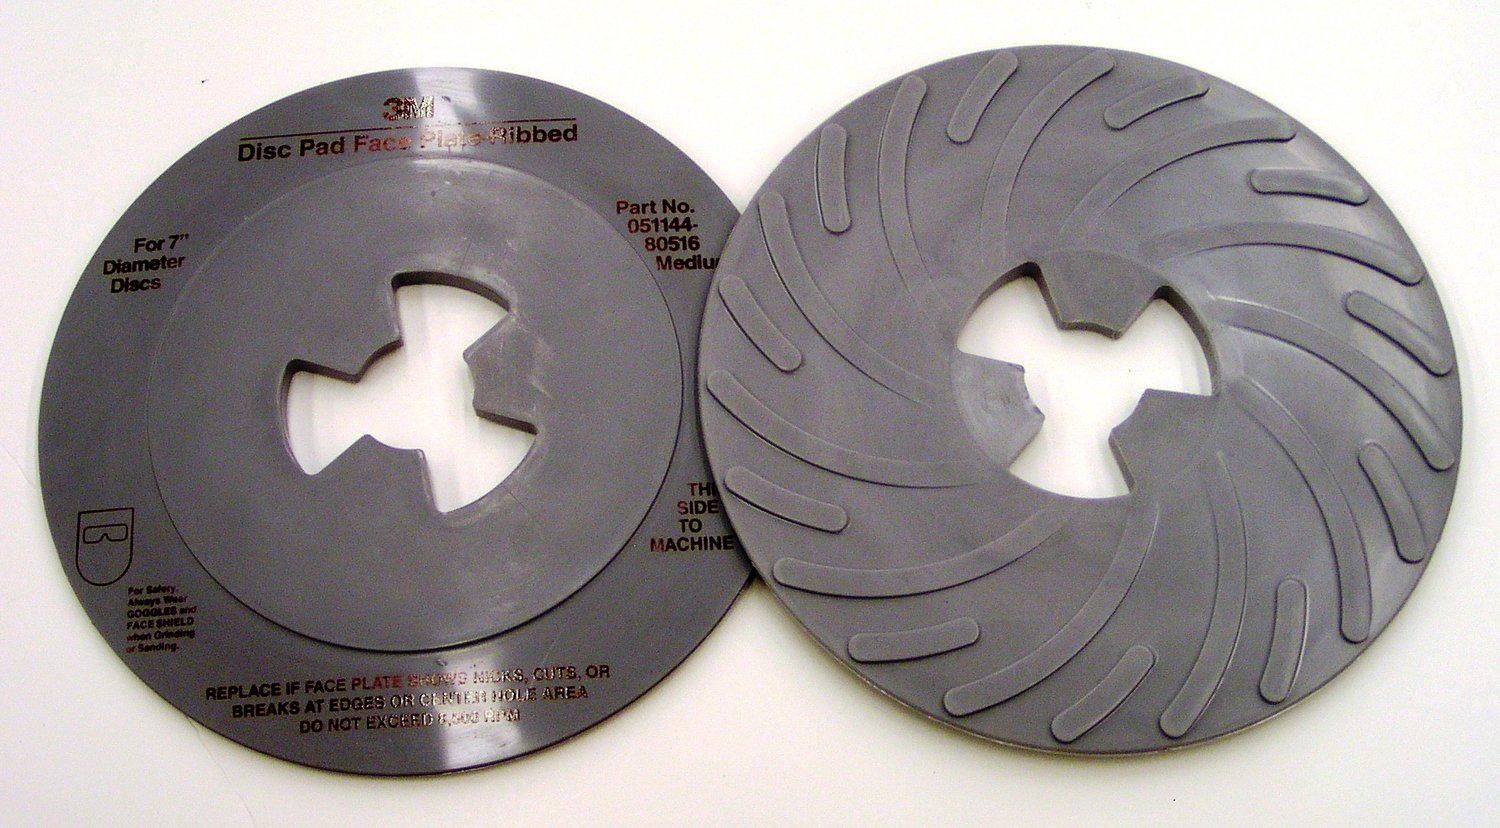 7000120515 - 3M Disc Pad Face Plate Ribbed 80516, 7 in Medium Gray, 10 ea/Case